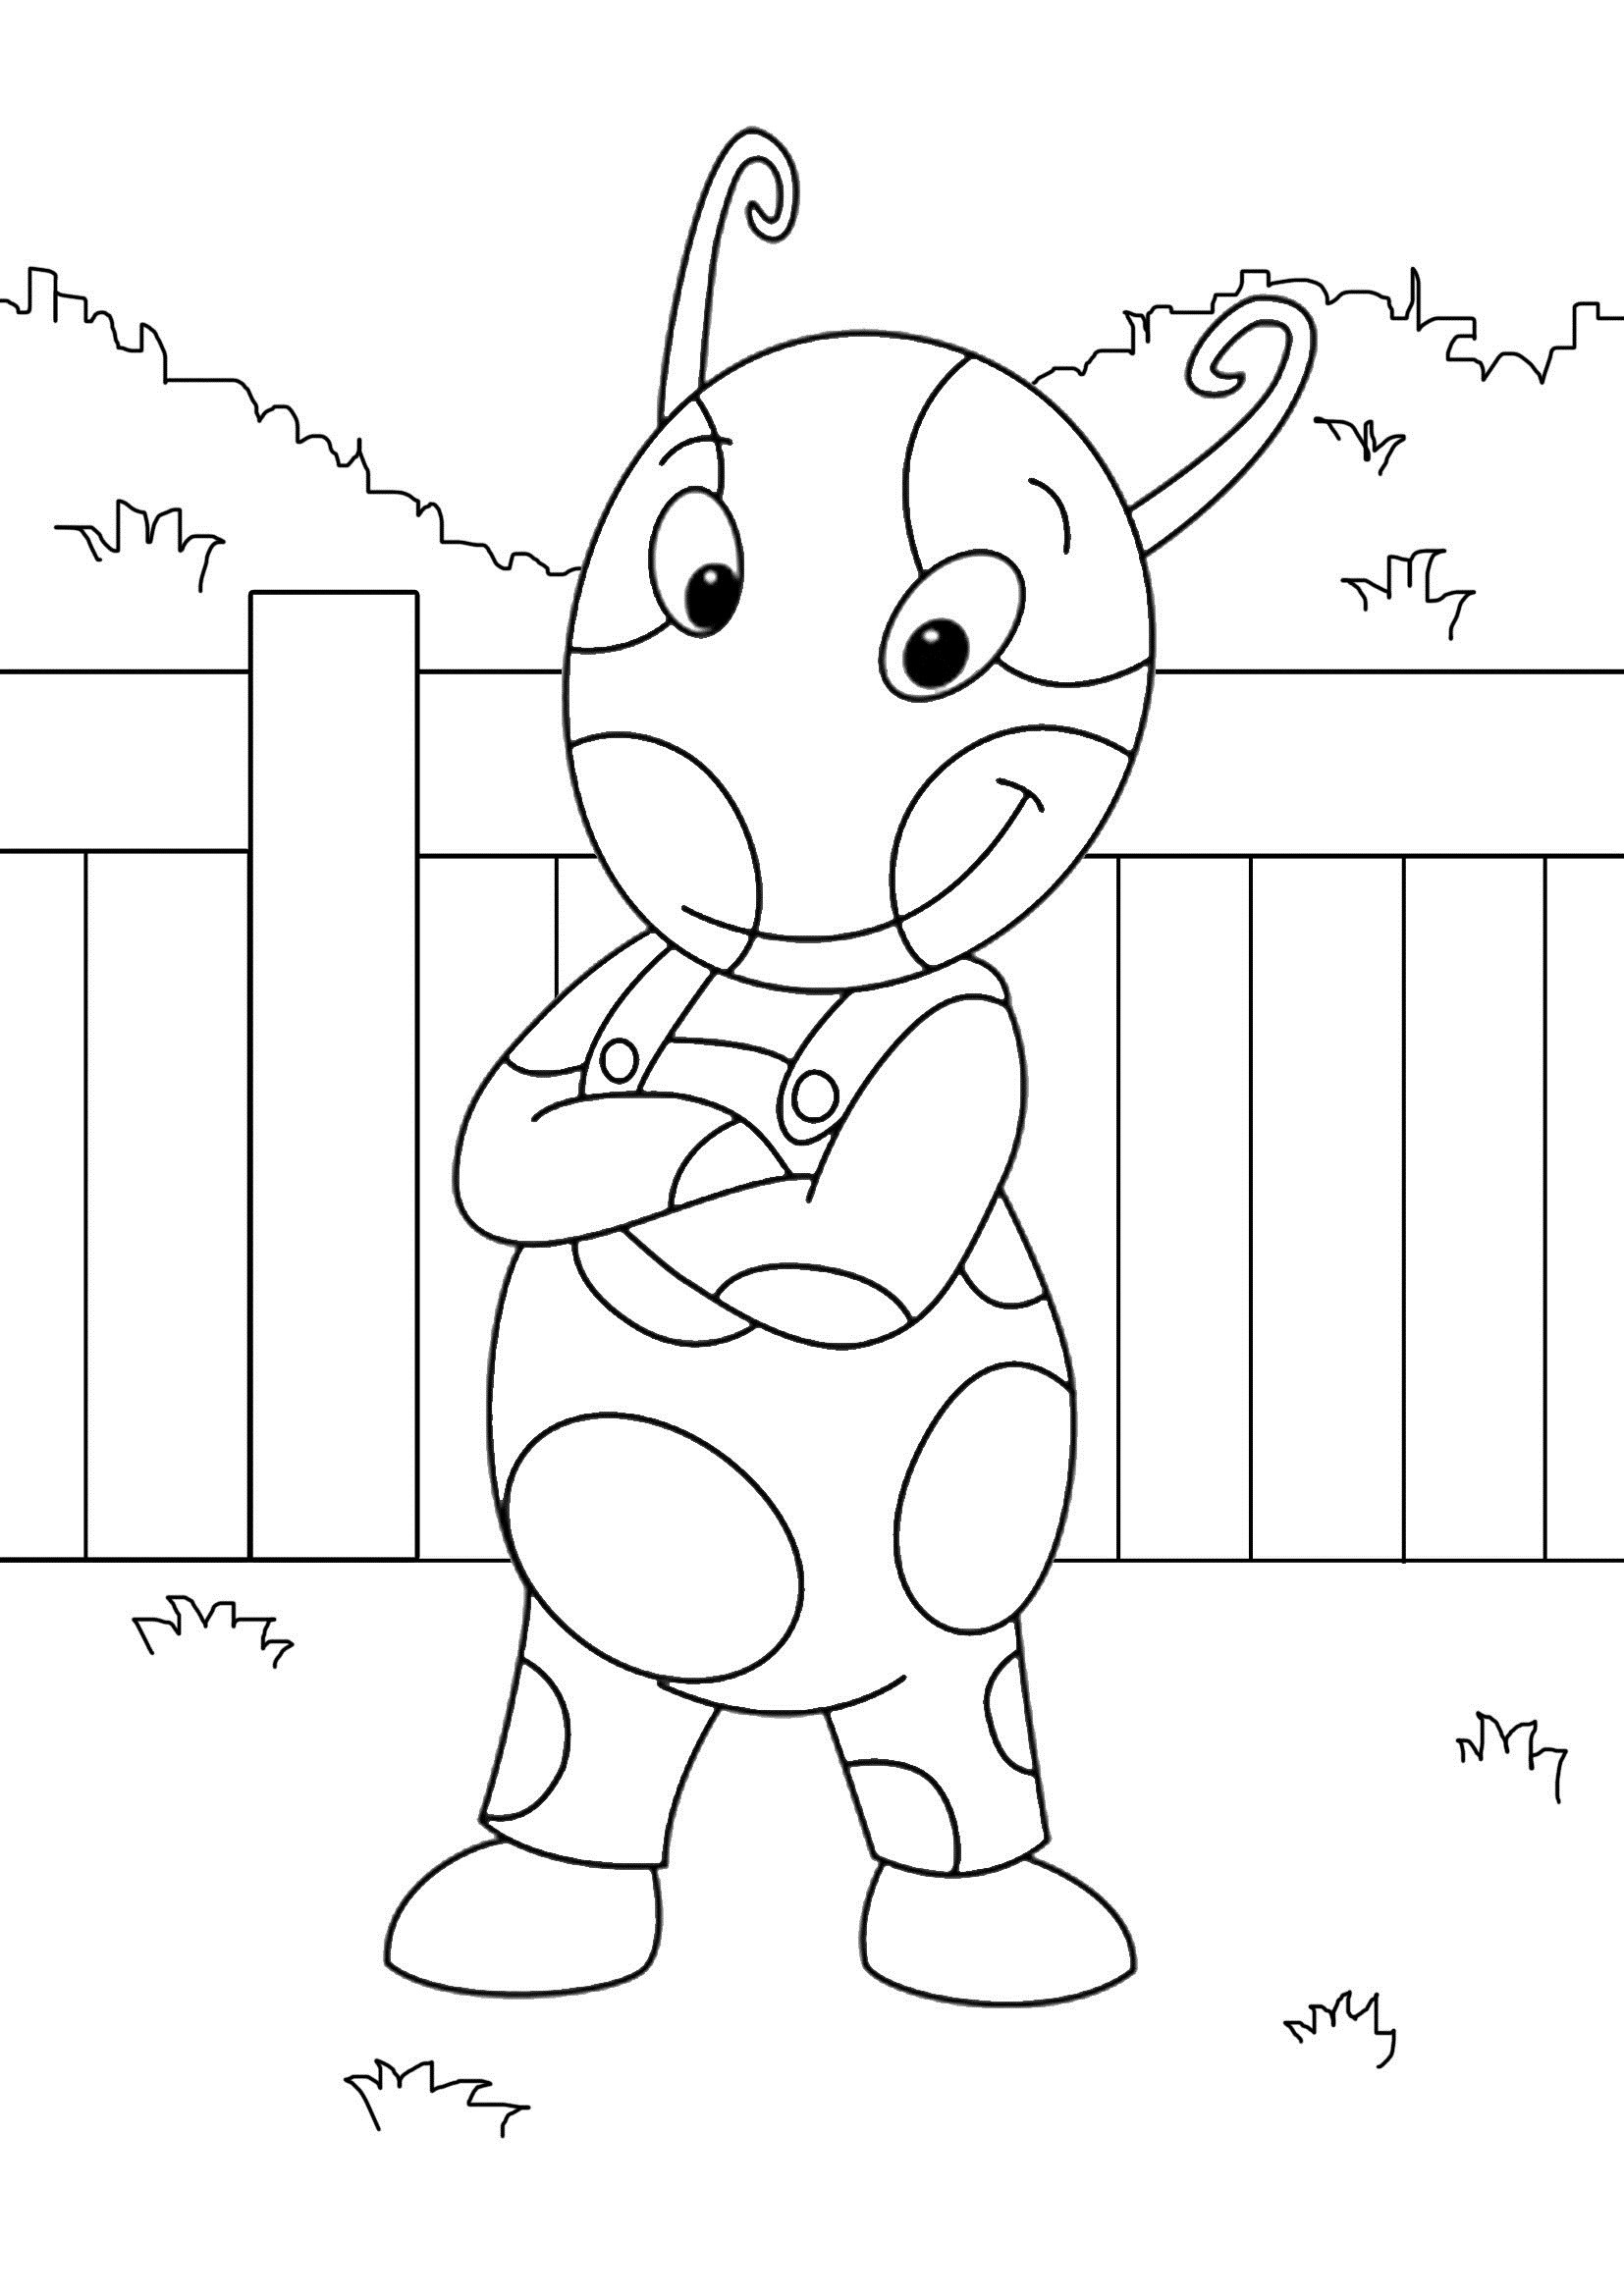 Kids Coloring Book Pages
 Free Printable Backyardigans Coloring Pages For Kids